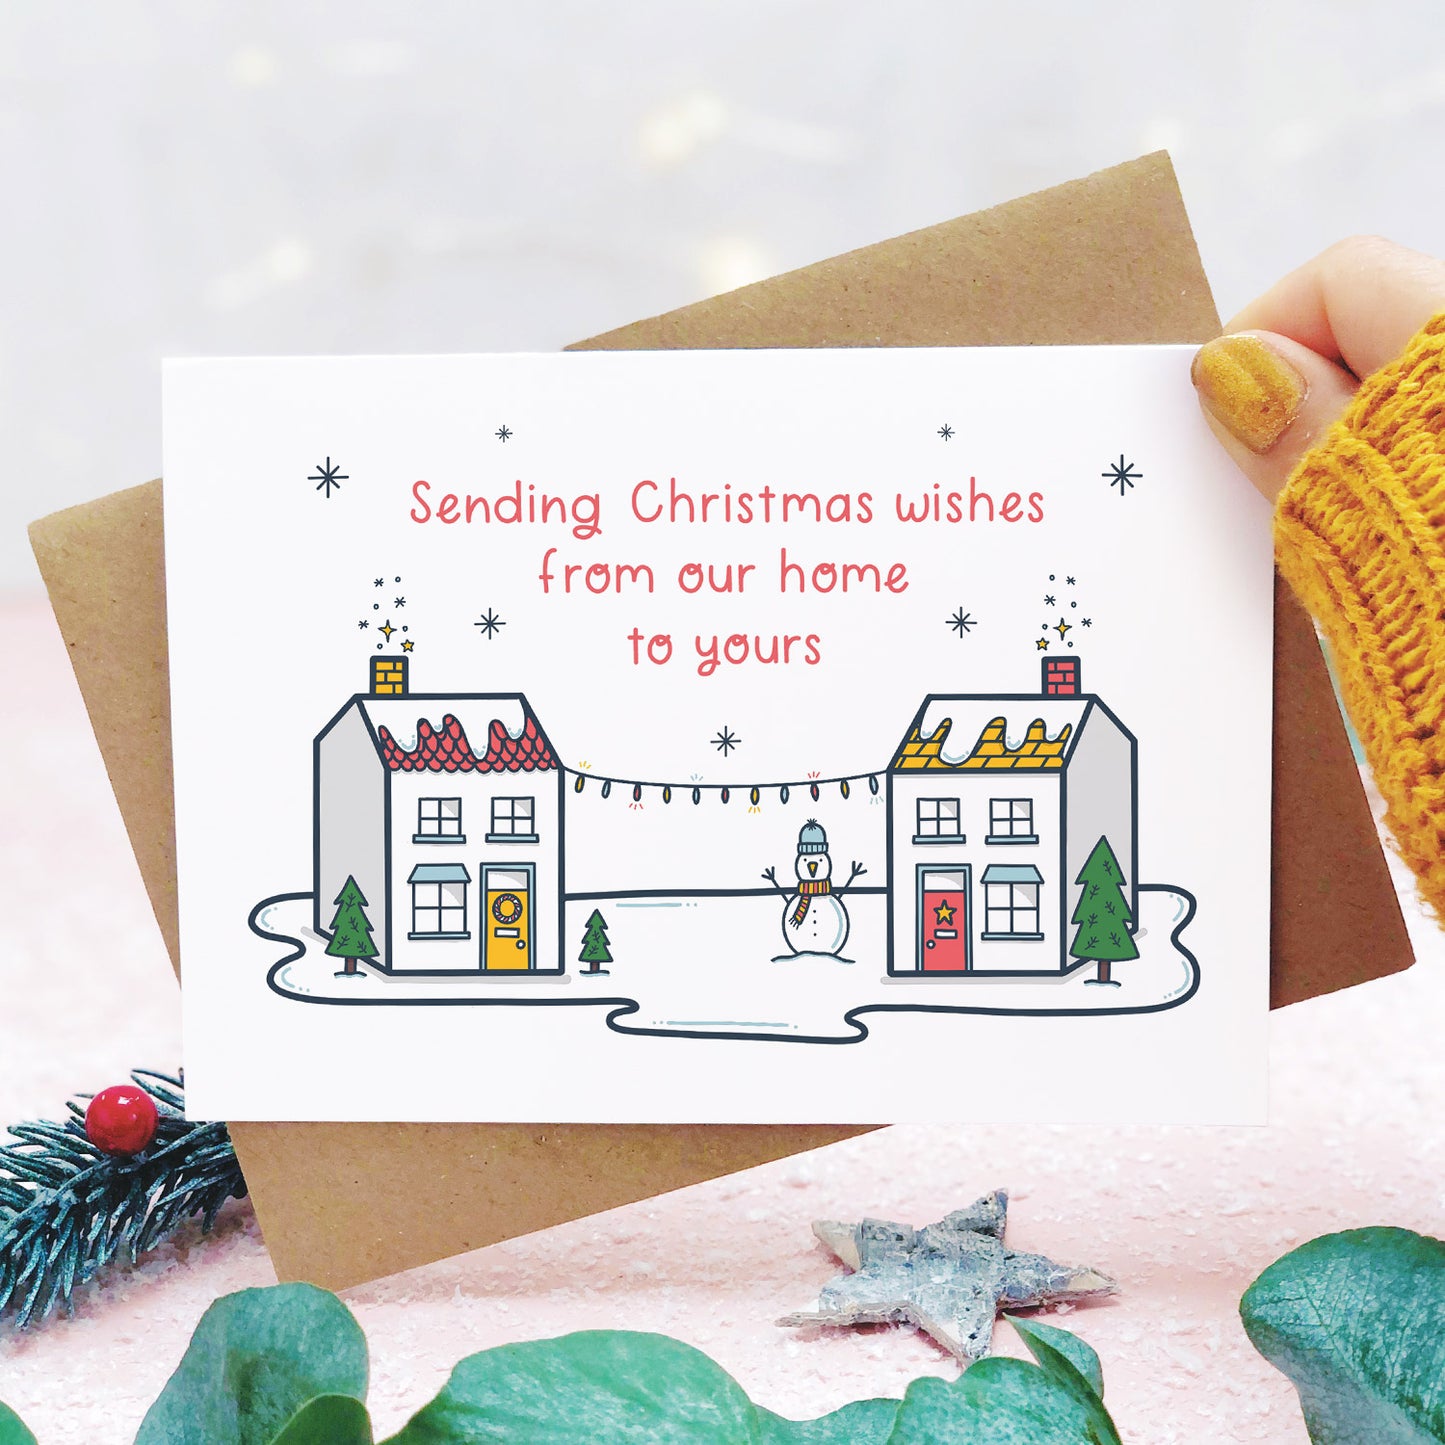  A sending wishes from our home to yours card photographed on a pink background, and being held on the right hand side with a yellow sleeve in view, with grey and green foliage. The card features two little houses connected by fairy lights.